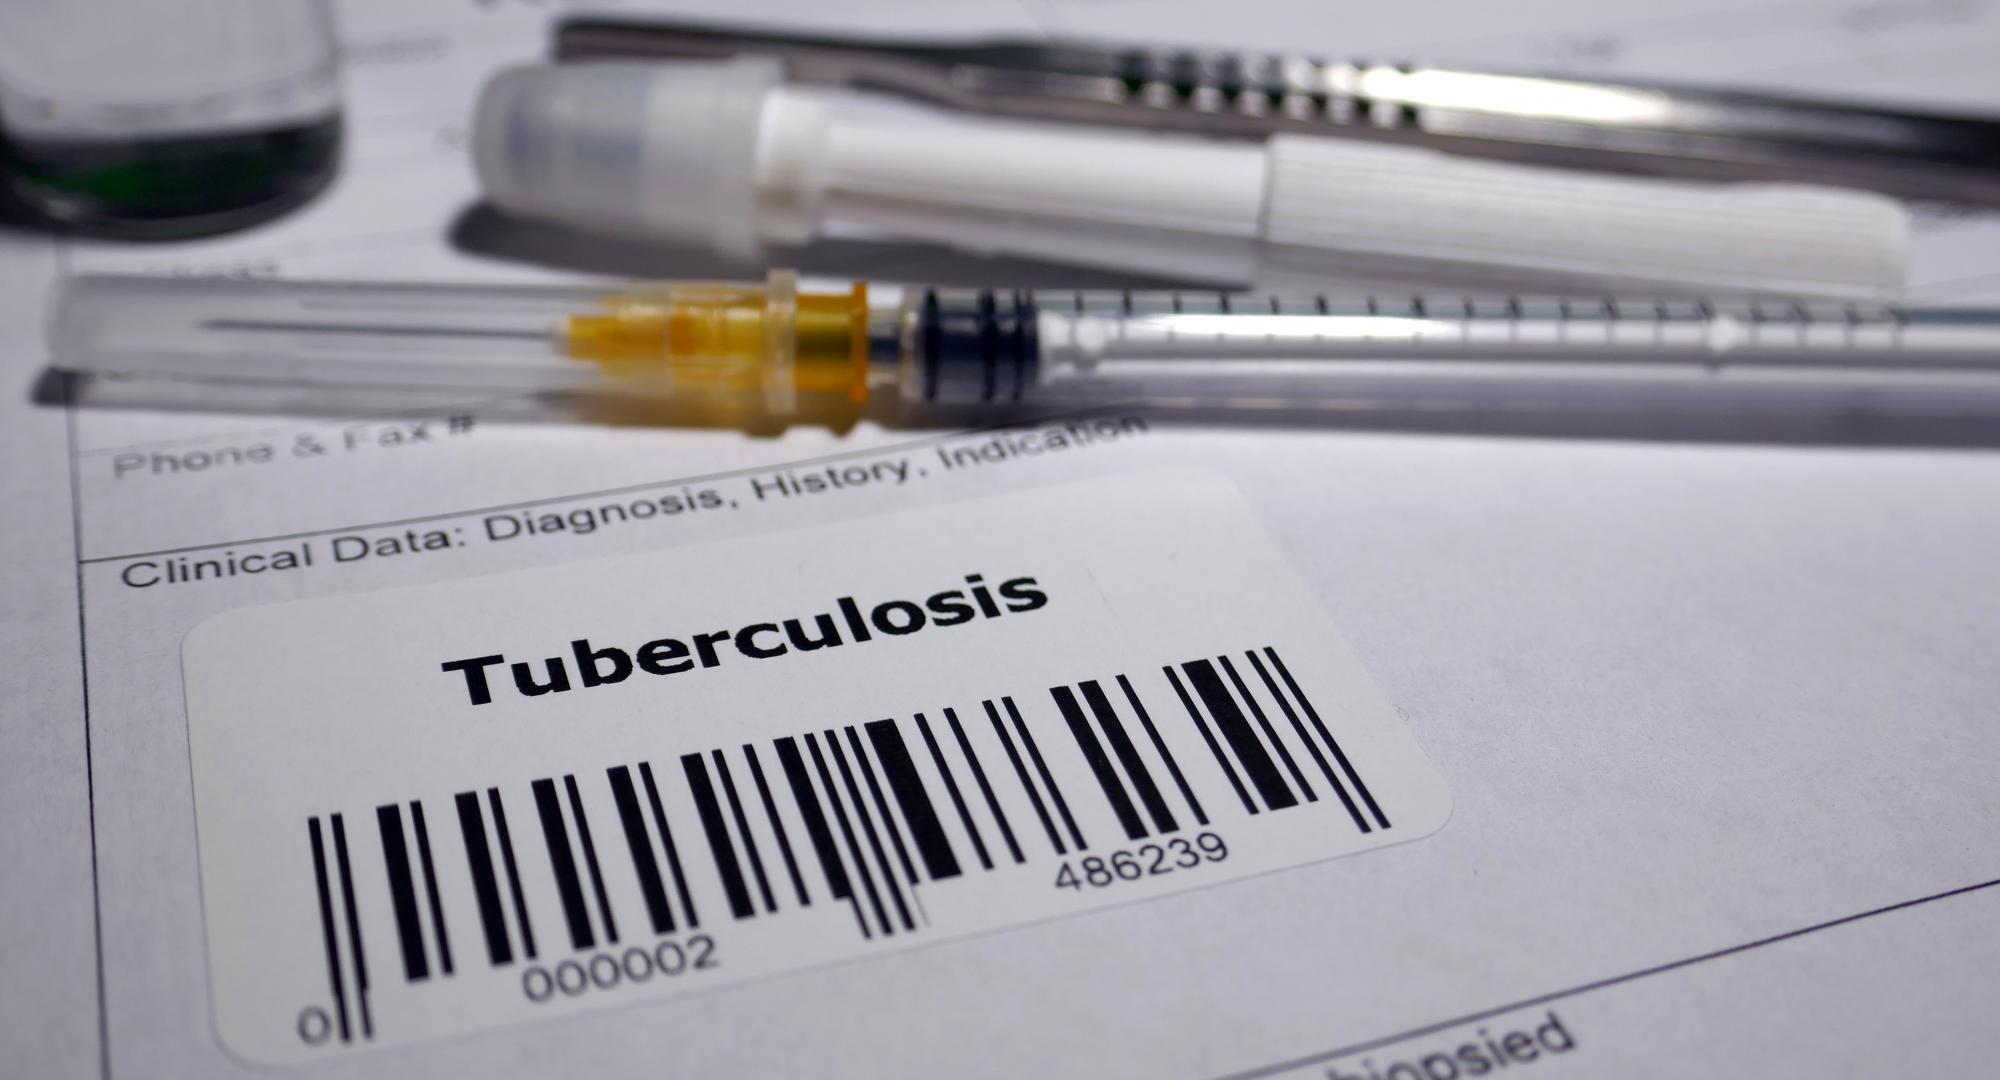 Request for biopsy - Tuberculosis